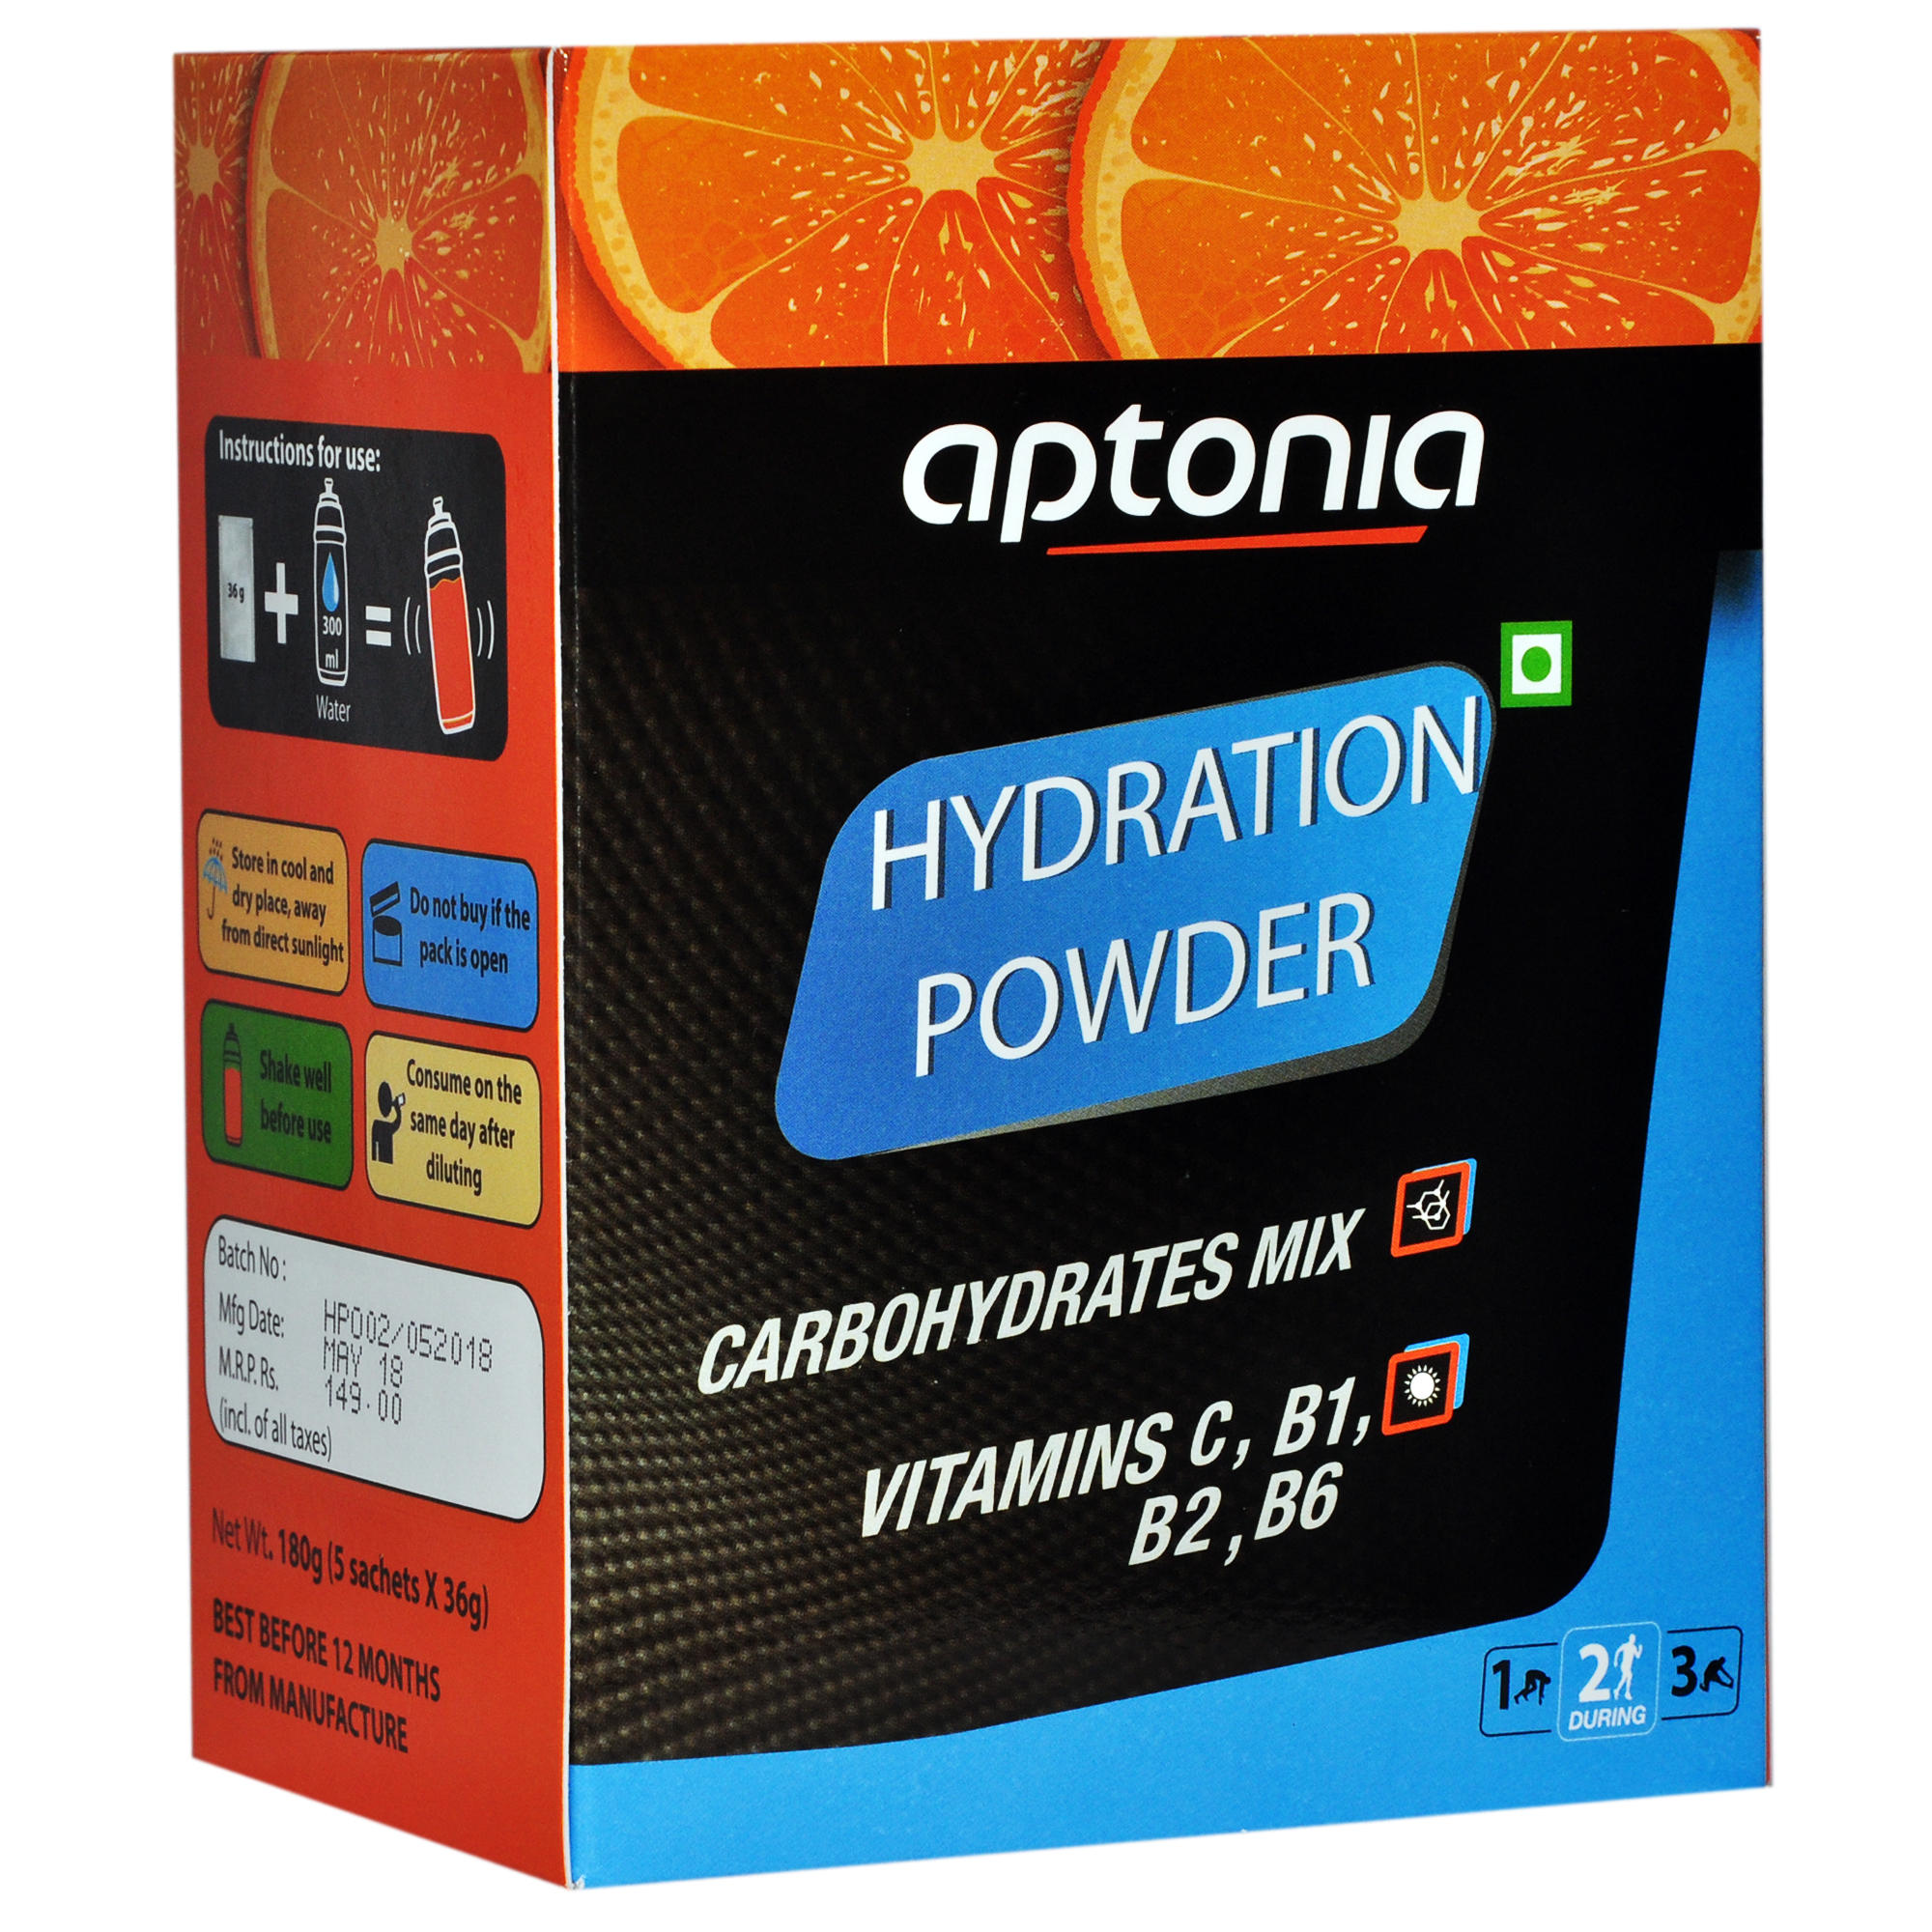 Hydration powder pack of 5